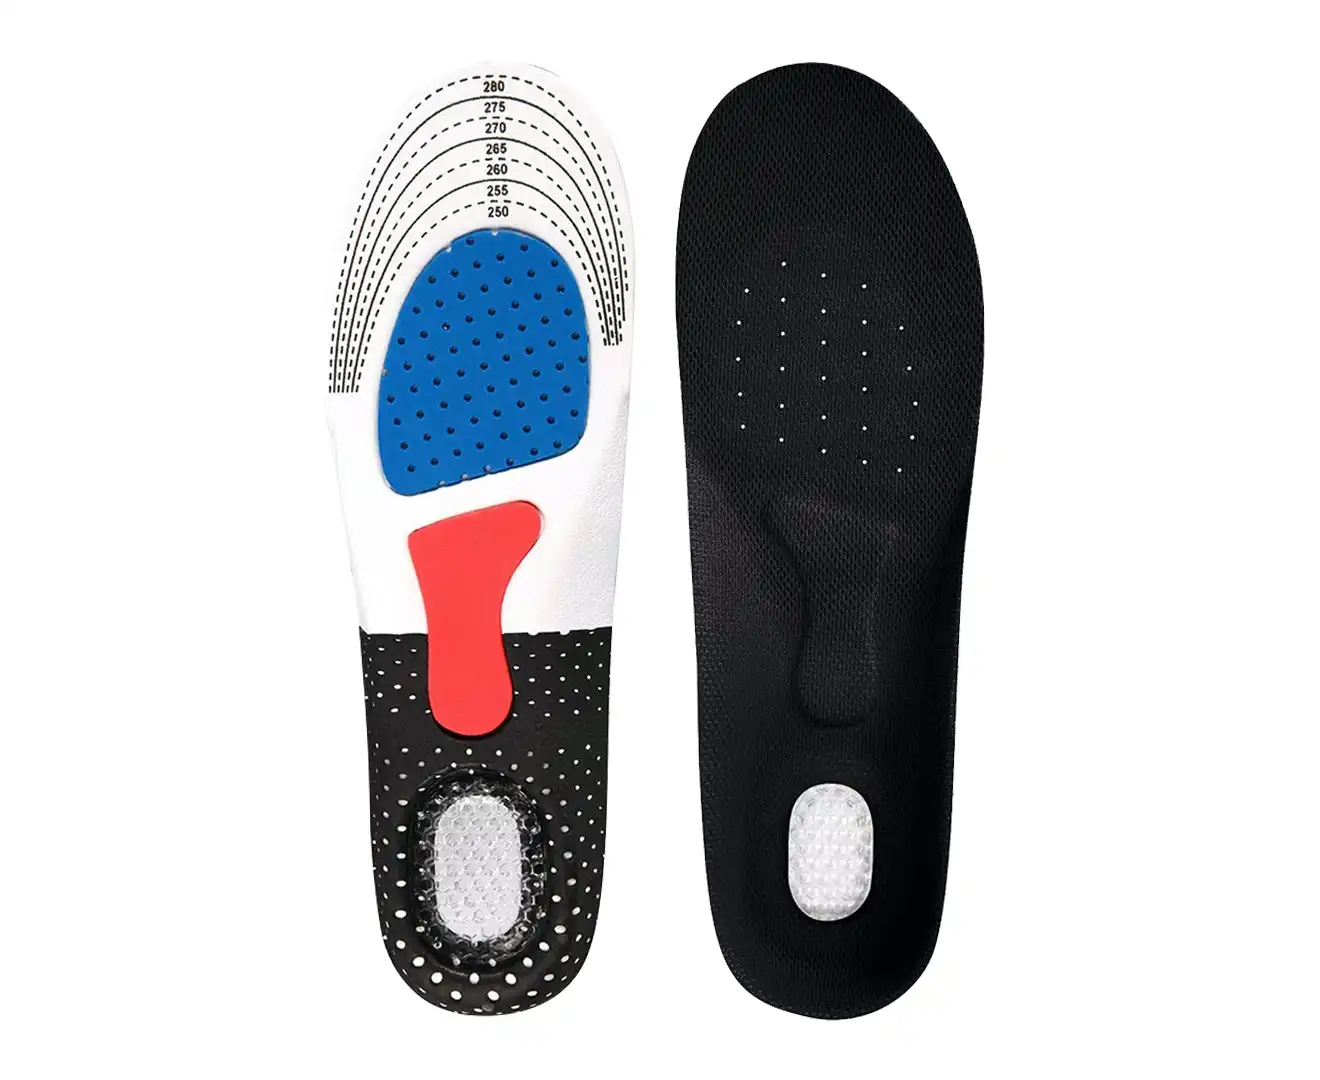 Arch Support Shoe Insoles Pain Relief Plantar Fasciitis Orthotic Inserts Pads (2 Sizes)